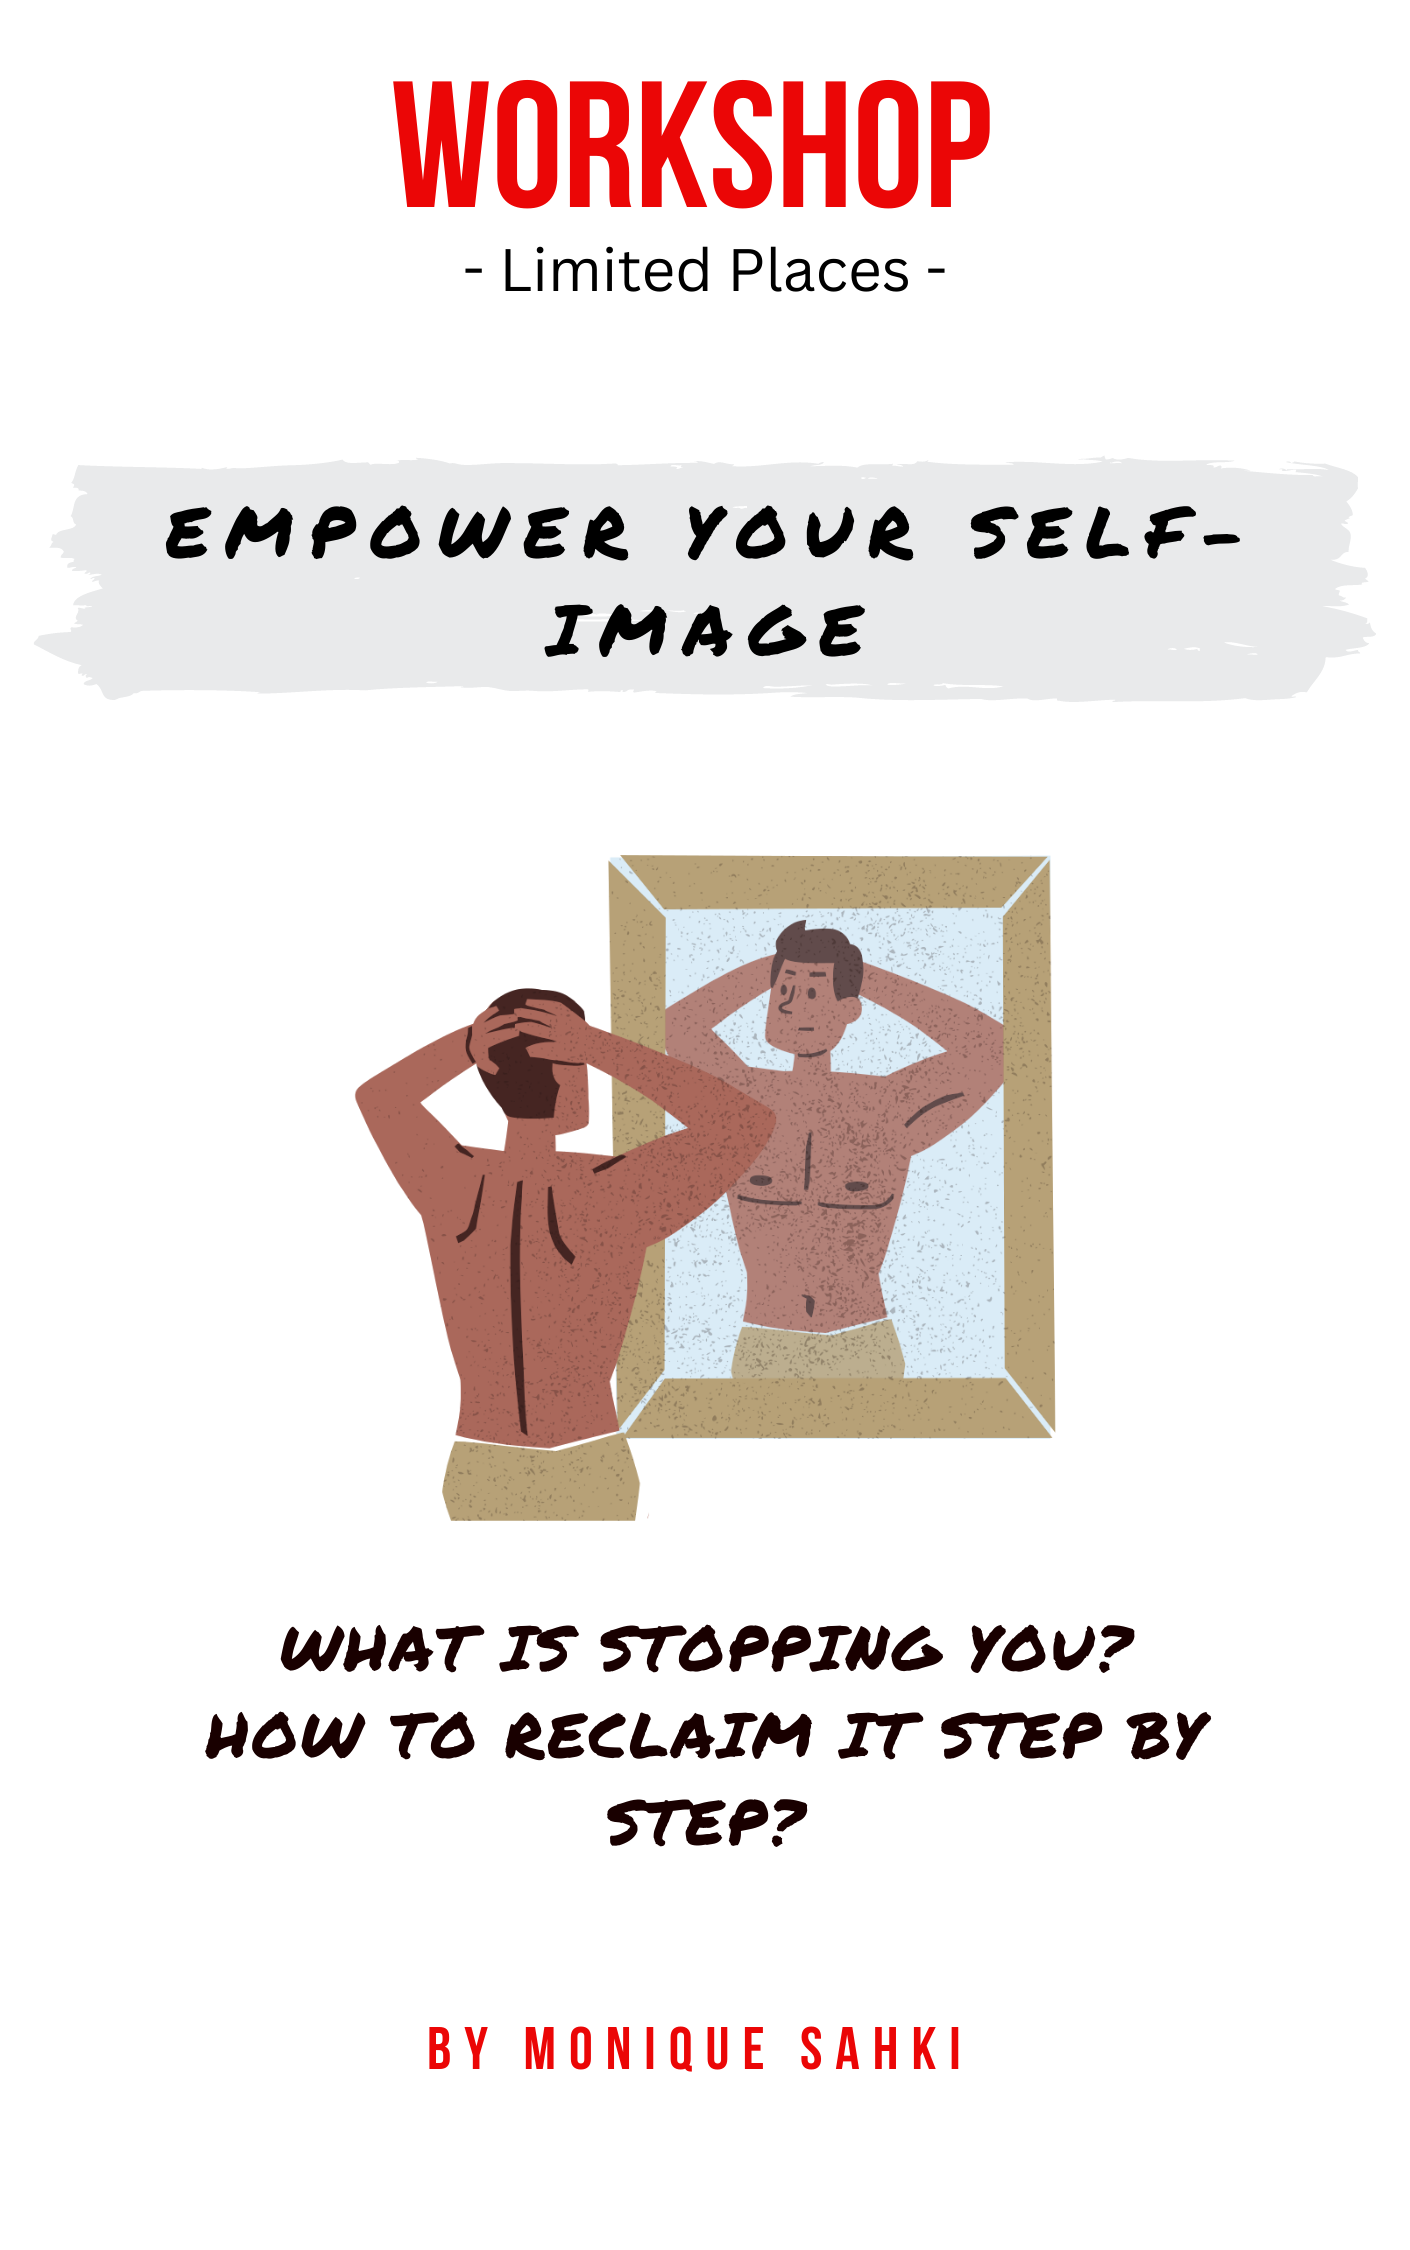 image for men empower your self image.png